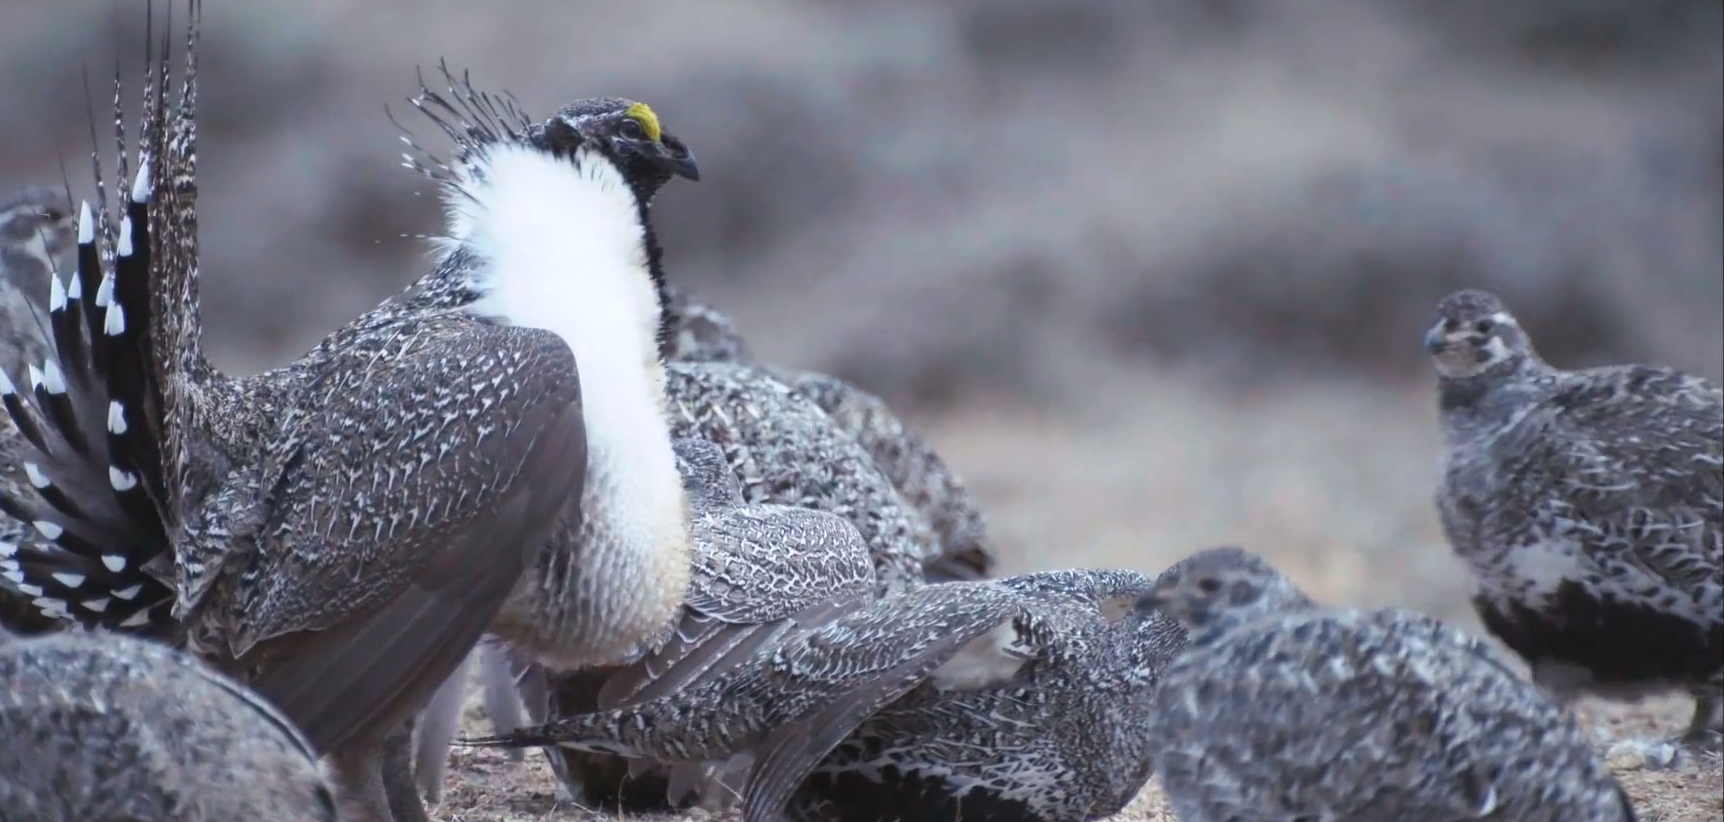 Greater-Sage-Grouse male with females